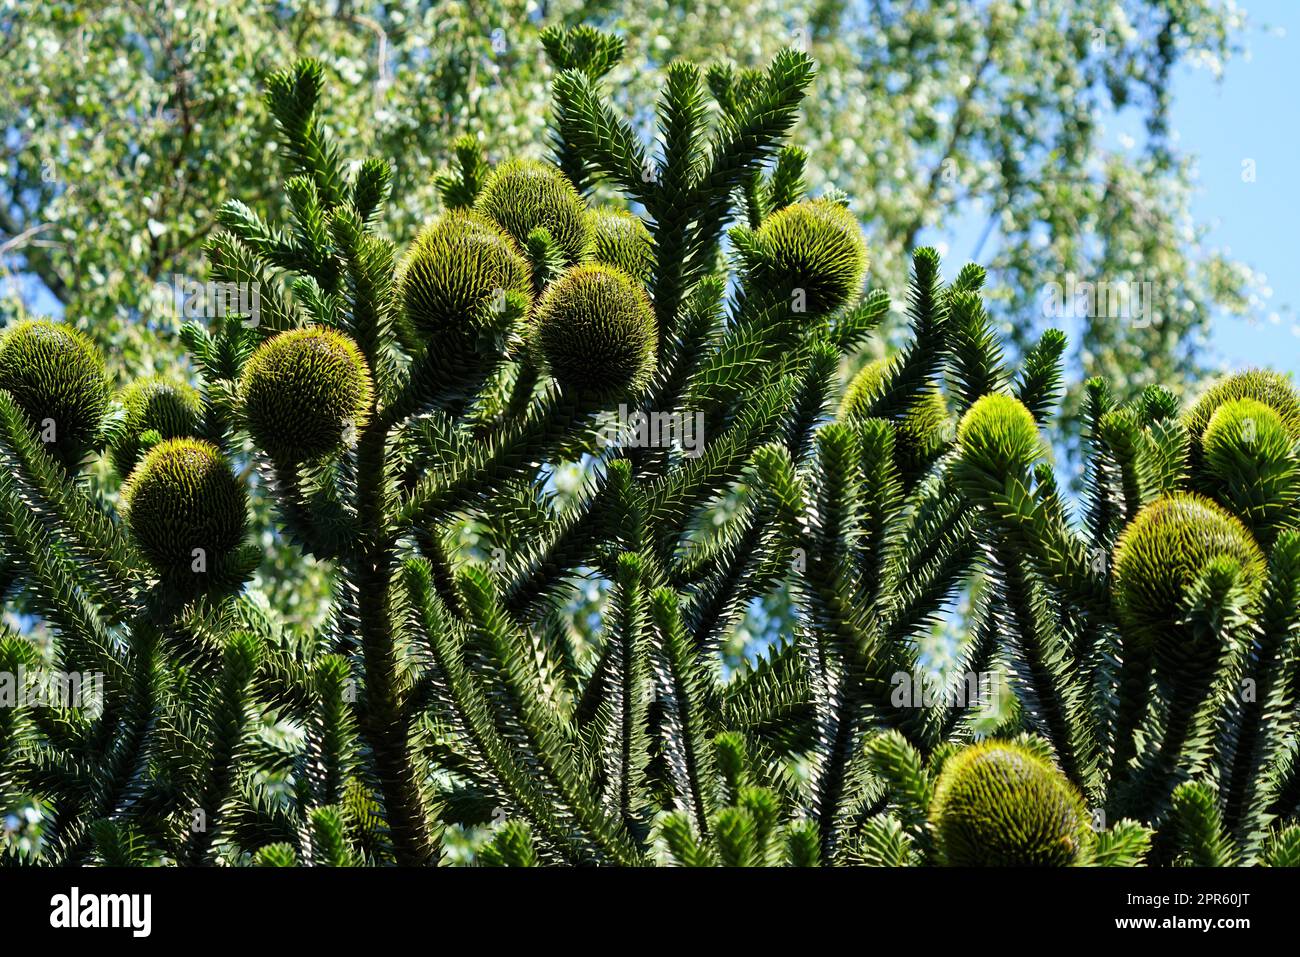 Chilean fir monkey puzzle tree under blue sky in summer Stock Photo